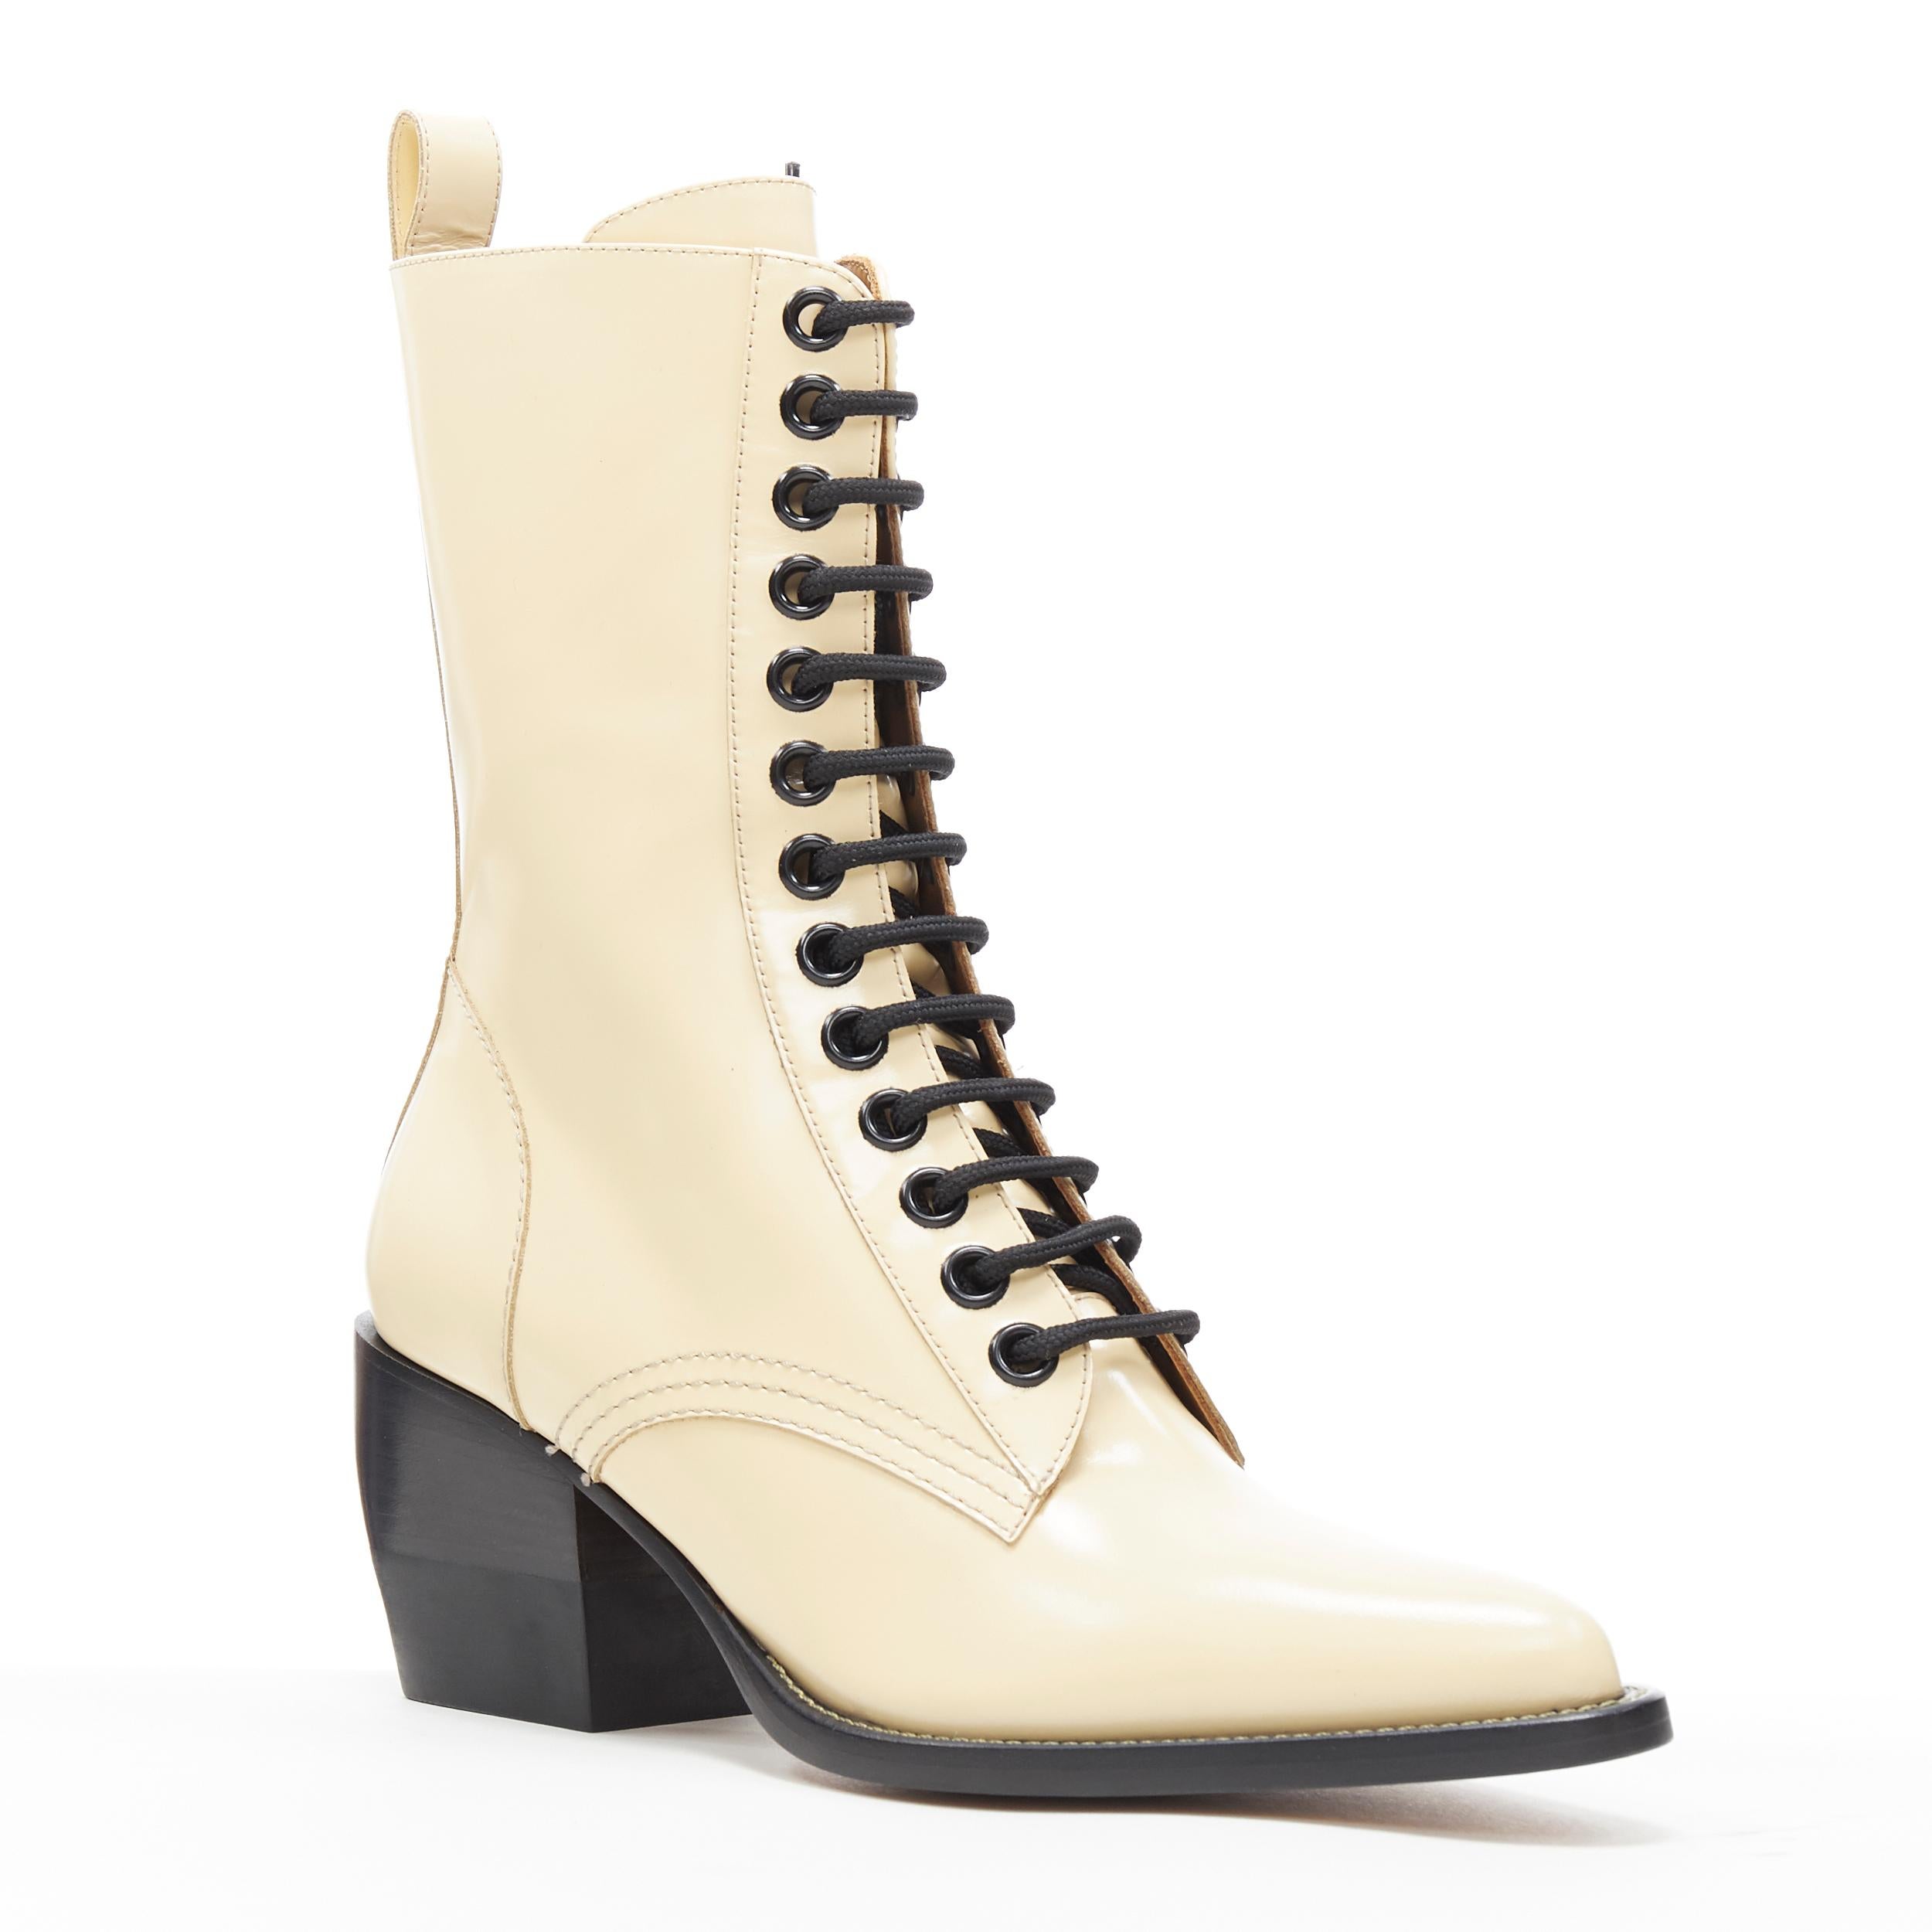 new CHLOE Runway Rylee beige leather lace up block heel pointed toe boot EU39
Brand: Chloe
Model Name / Style: Rylee
Material: Leather
Color: Beige
Pattern: Solid
Closure: Lace up
Extra Detail: Signature Runway Rylee boots by Chloe. Ankle boots.